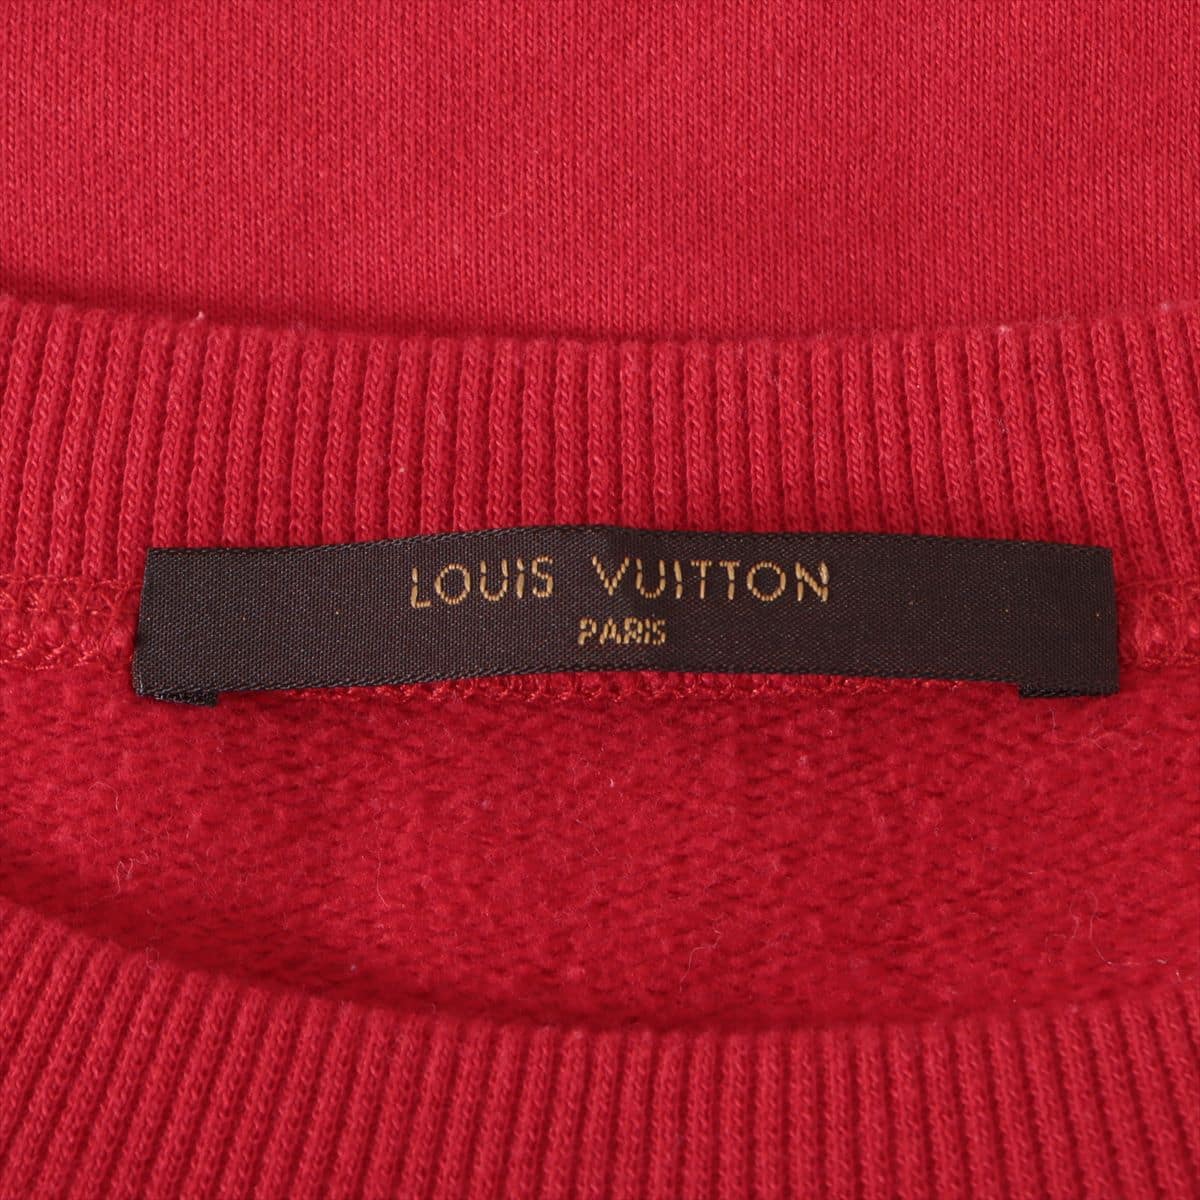 Louis Vuitton × Supreme Monogram 17AW Cotton & rayon Basic knitted fabric L Men's Red  RM172 Arch logo